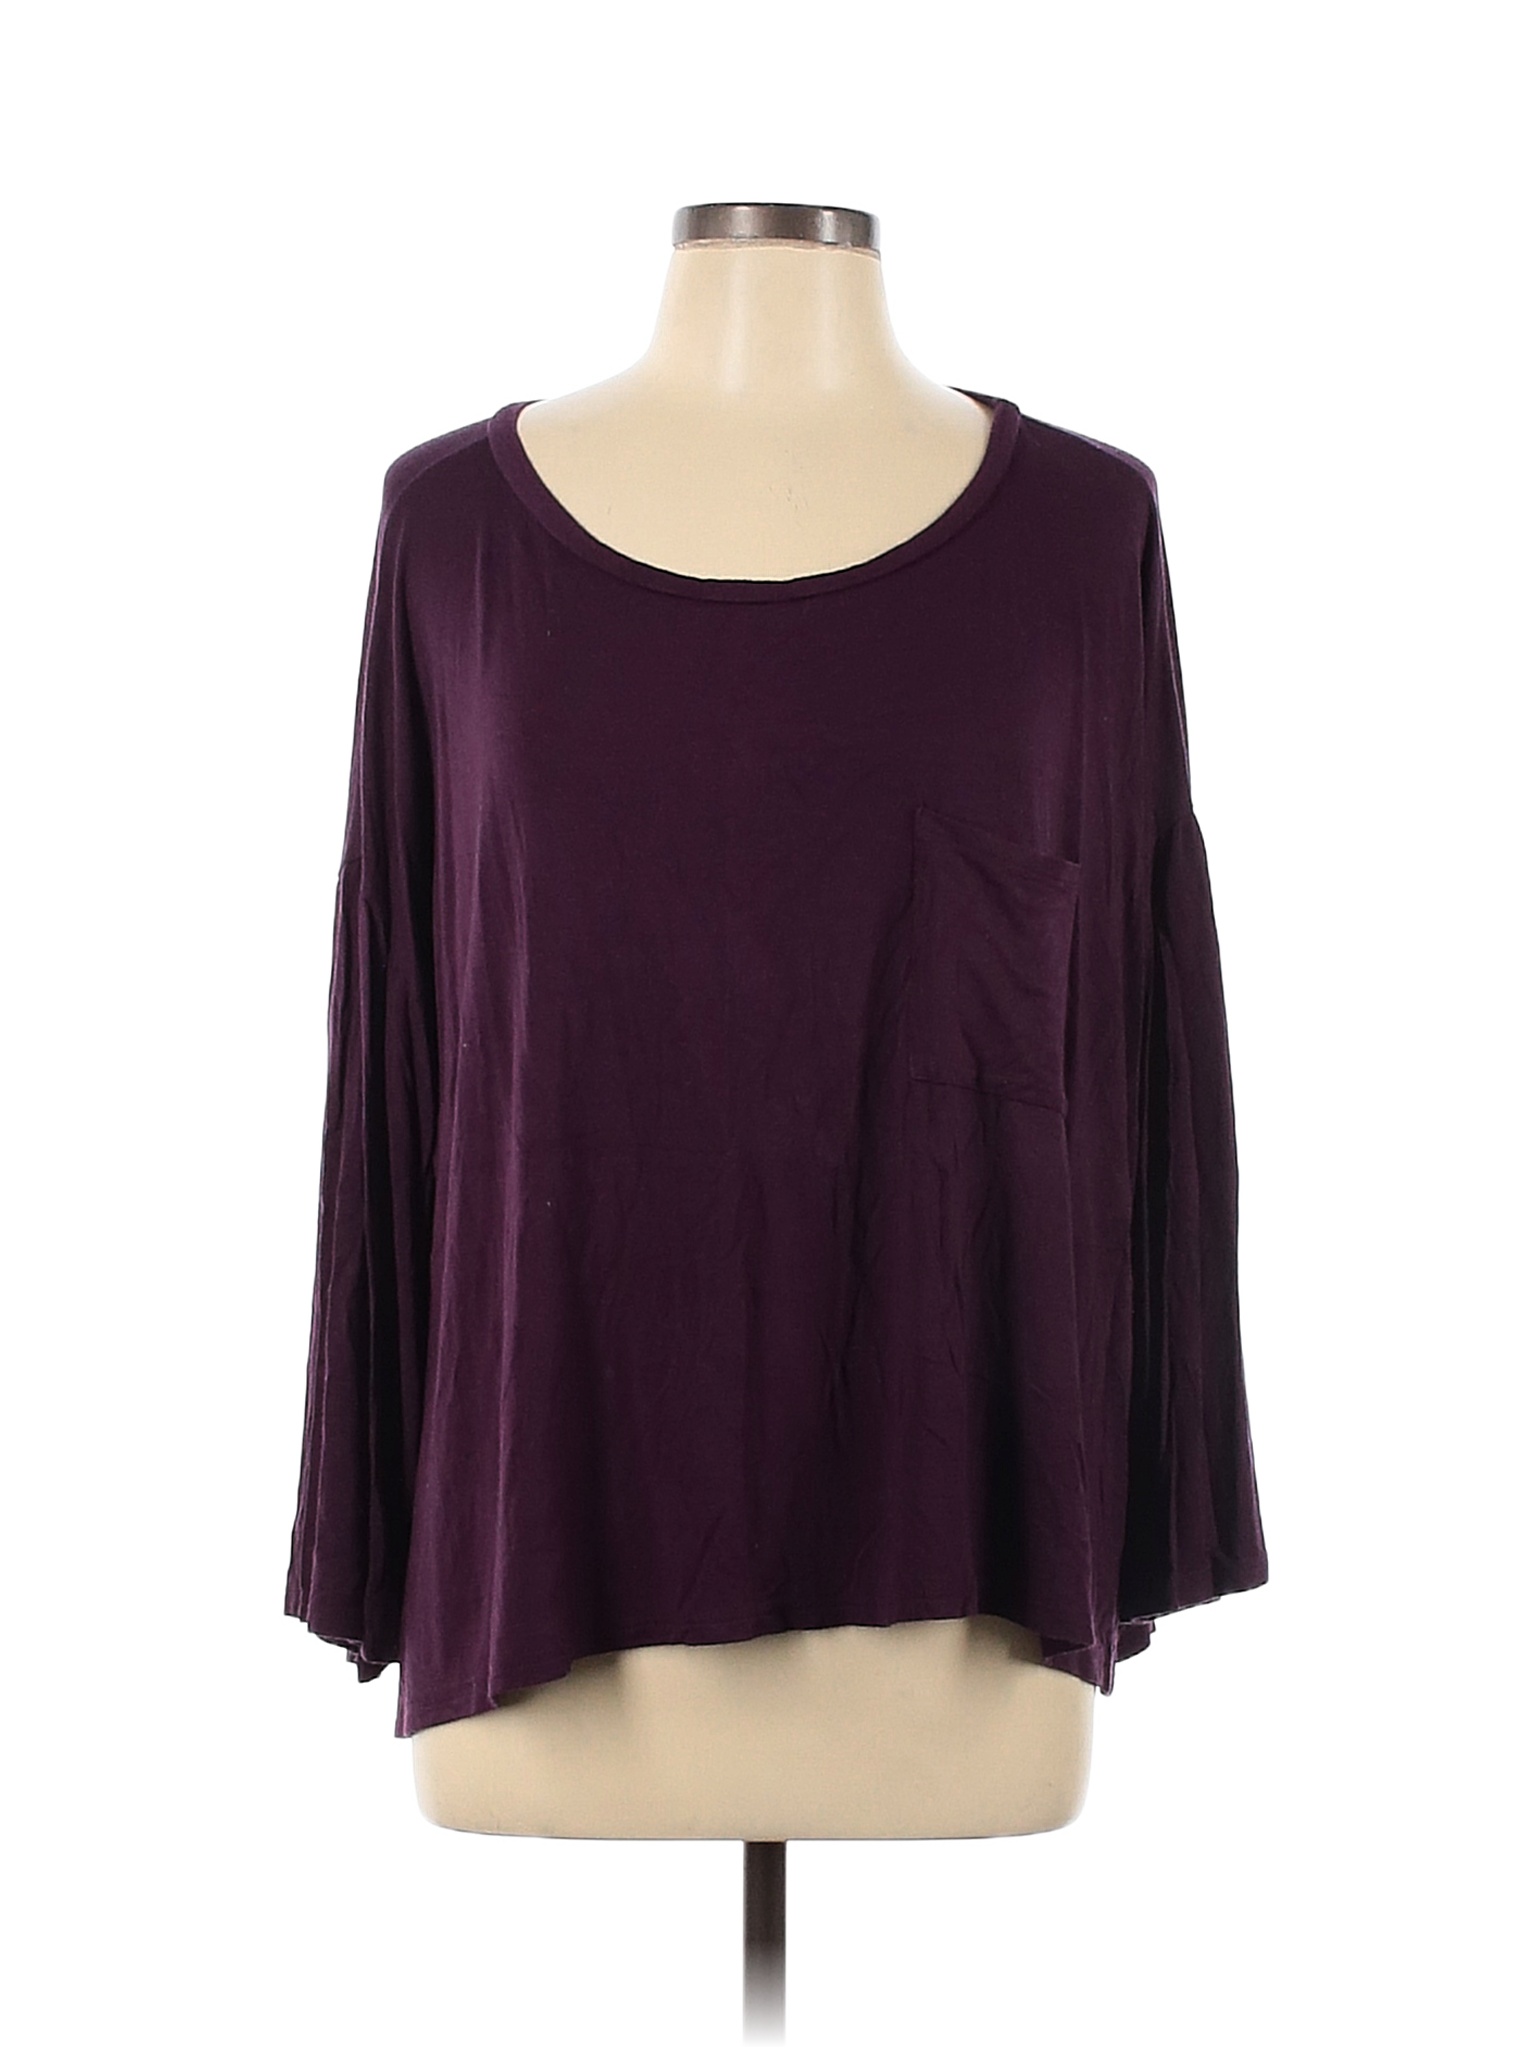 Assorted Brands Colored Purple 3/4 Sleeve T-Shirt Size L - 56% off ...